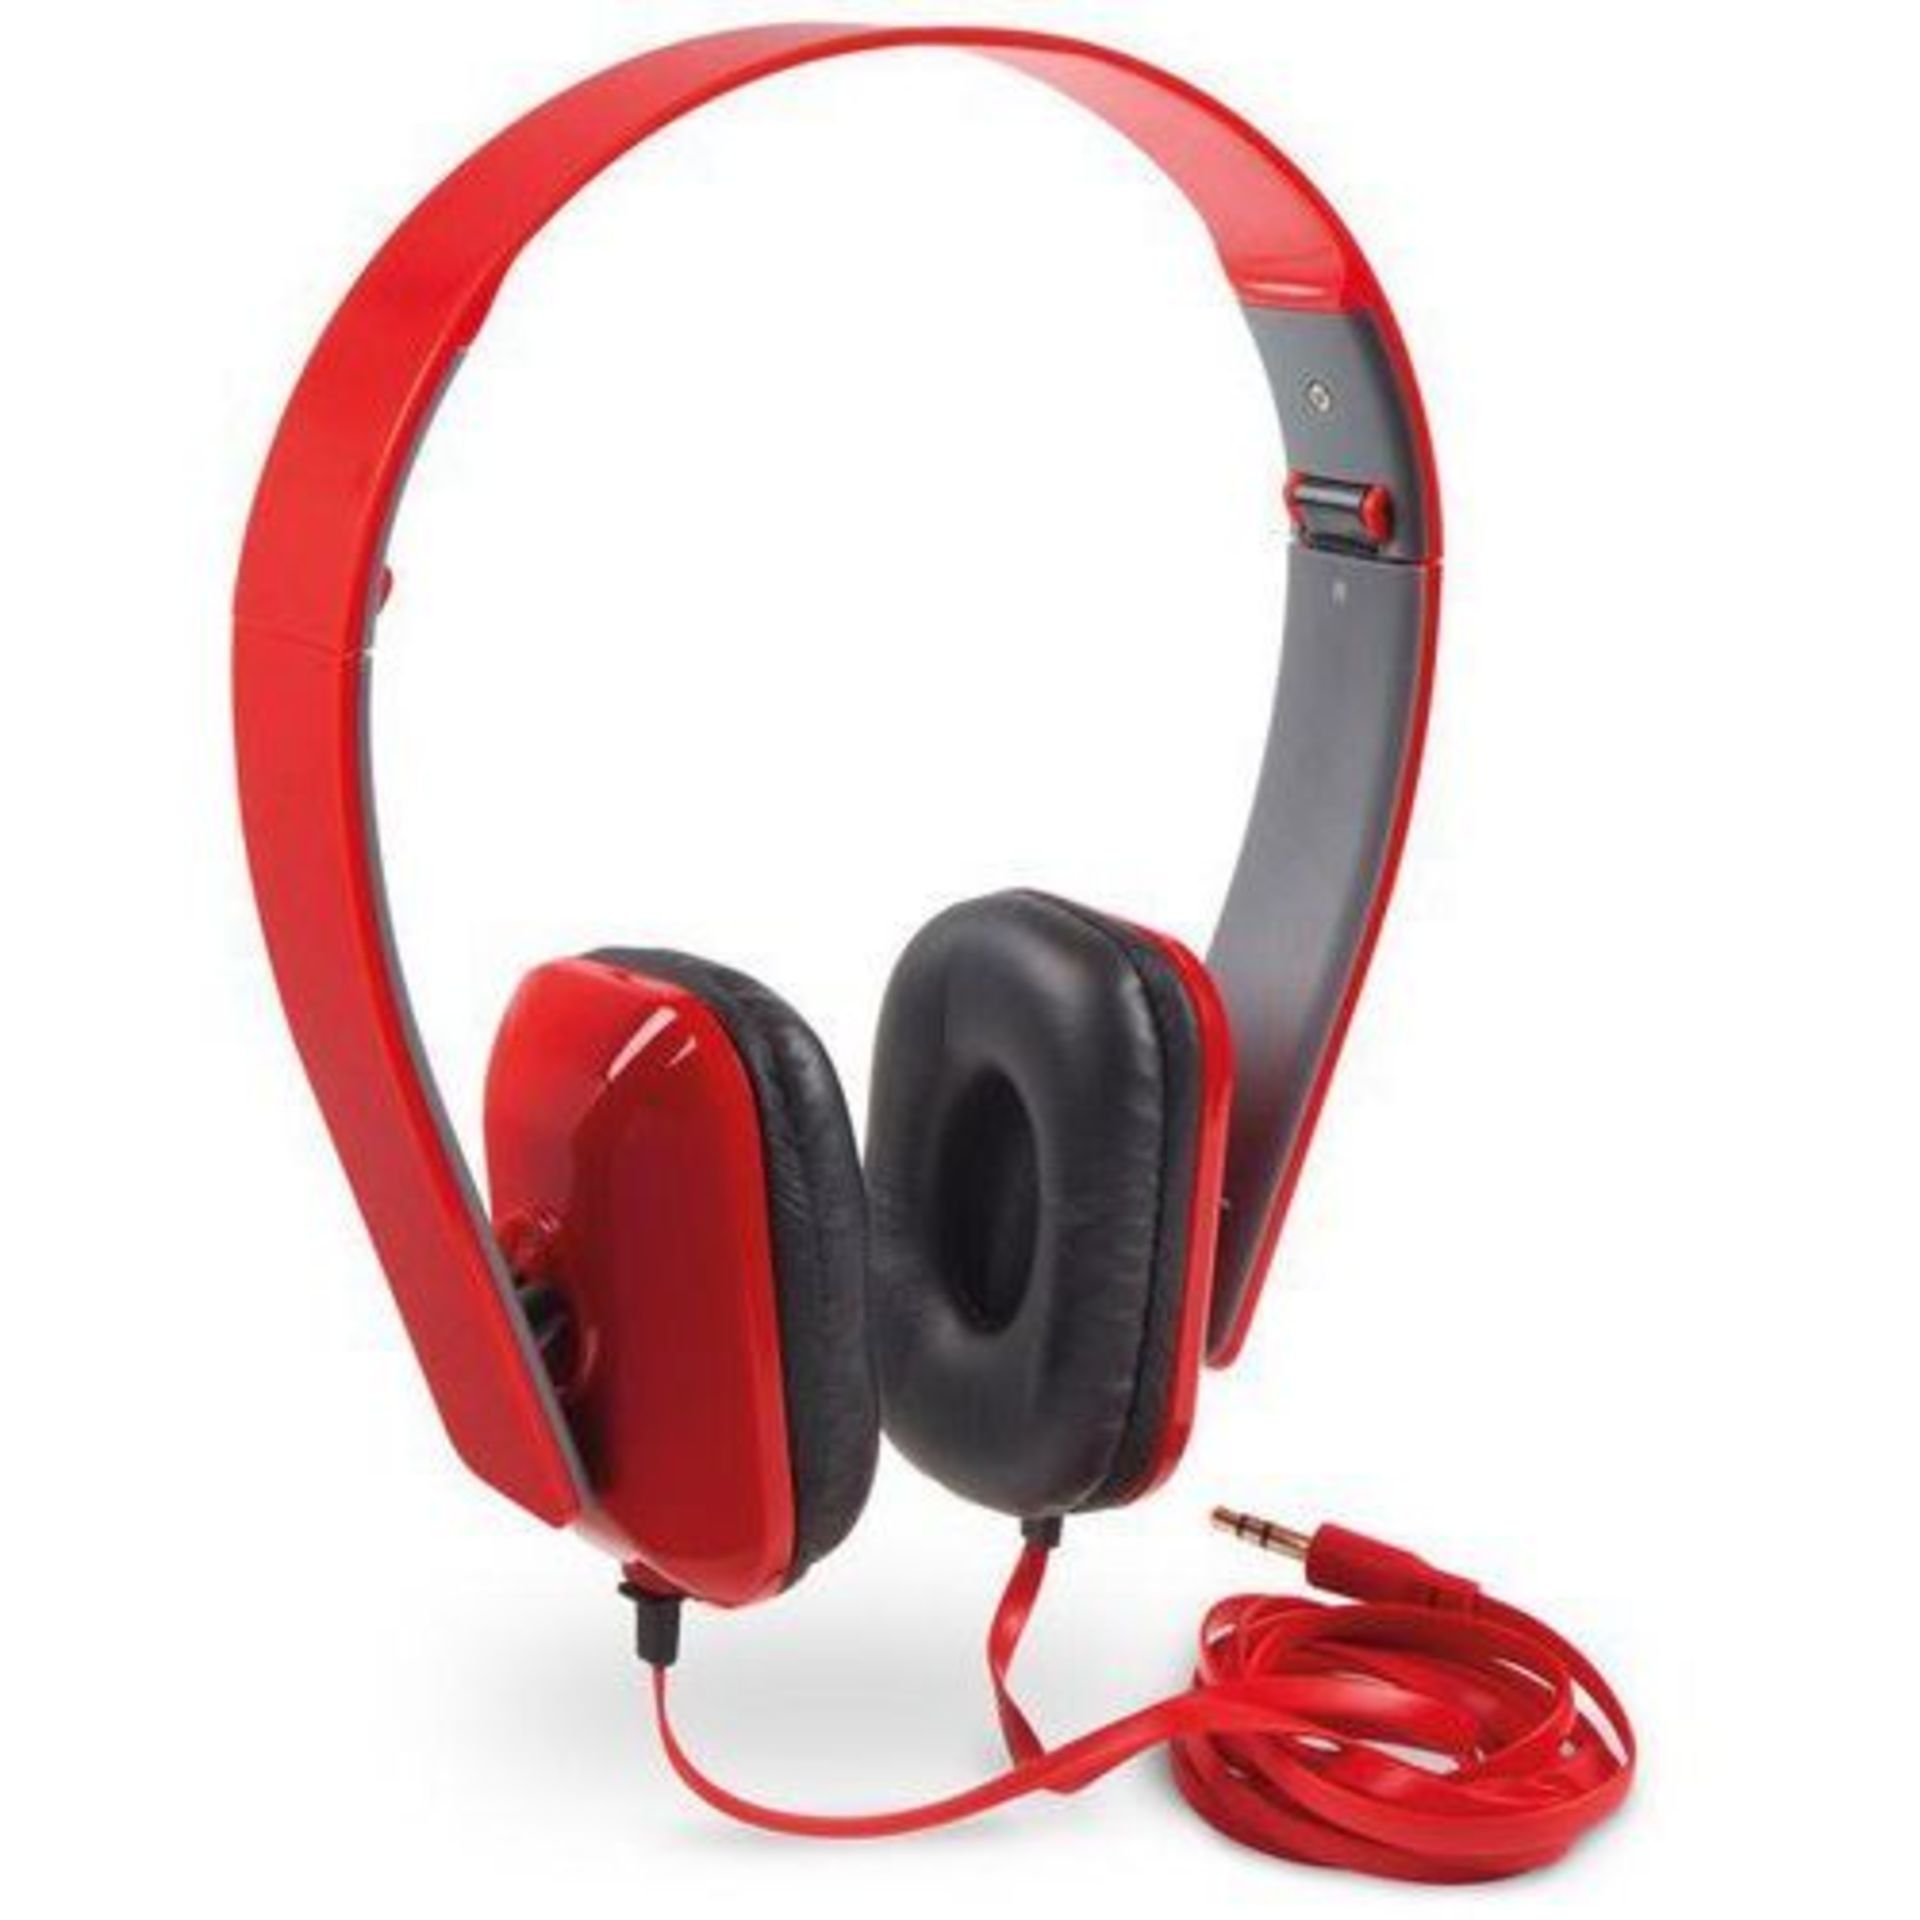 V *TRADE QTY* Brand New Targus Carry & Listen Headphones X 6 YOUR BID PRICE TO BE MULTIPLIED BY SIX